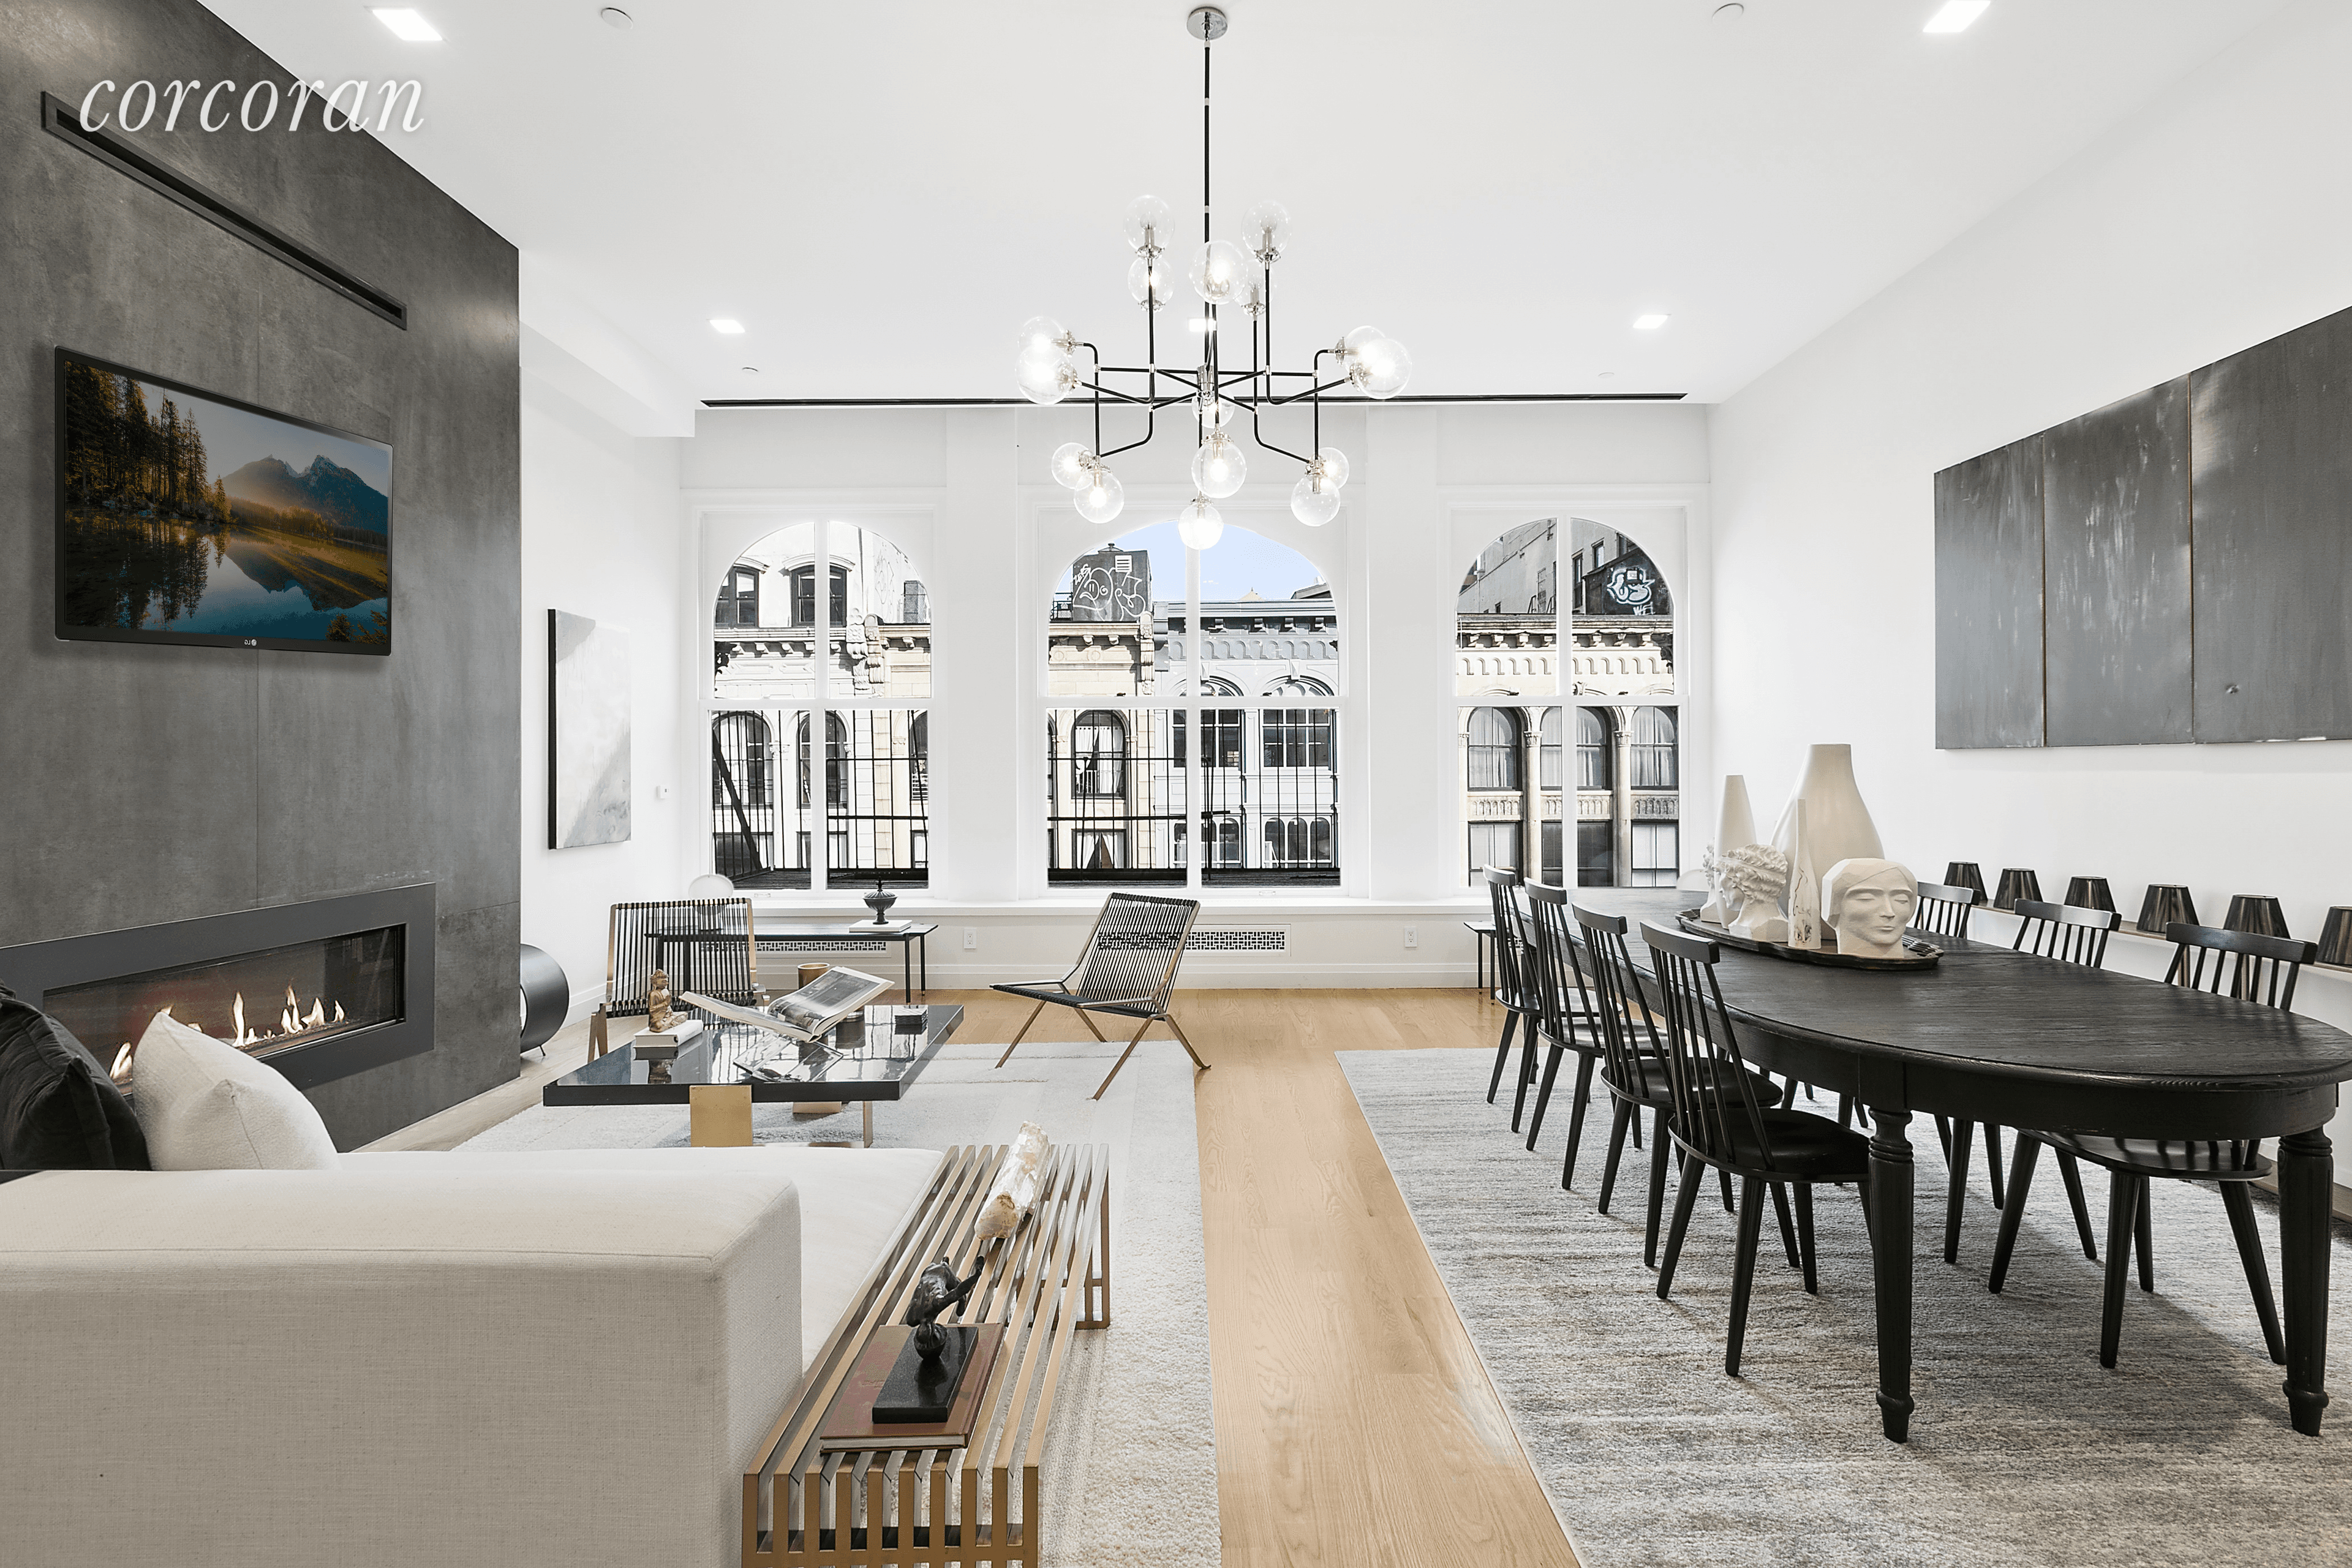 391 Broadway is an exquisite conversion of a historic cast iron Pre war loft building located in Tribeca.